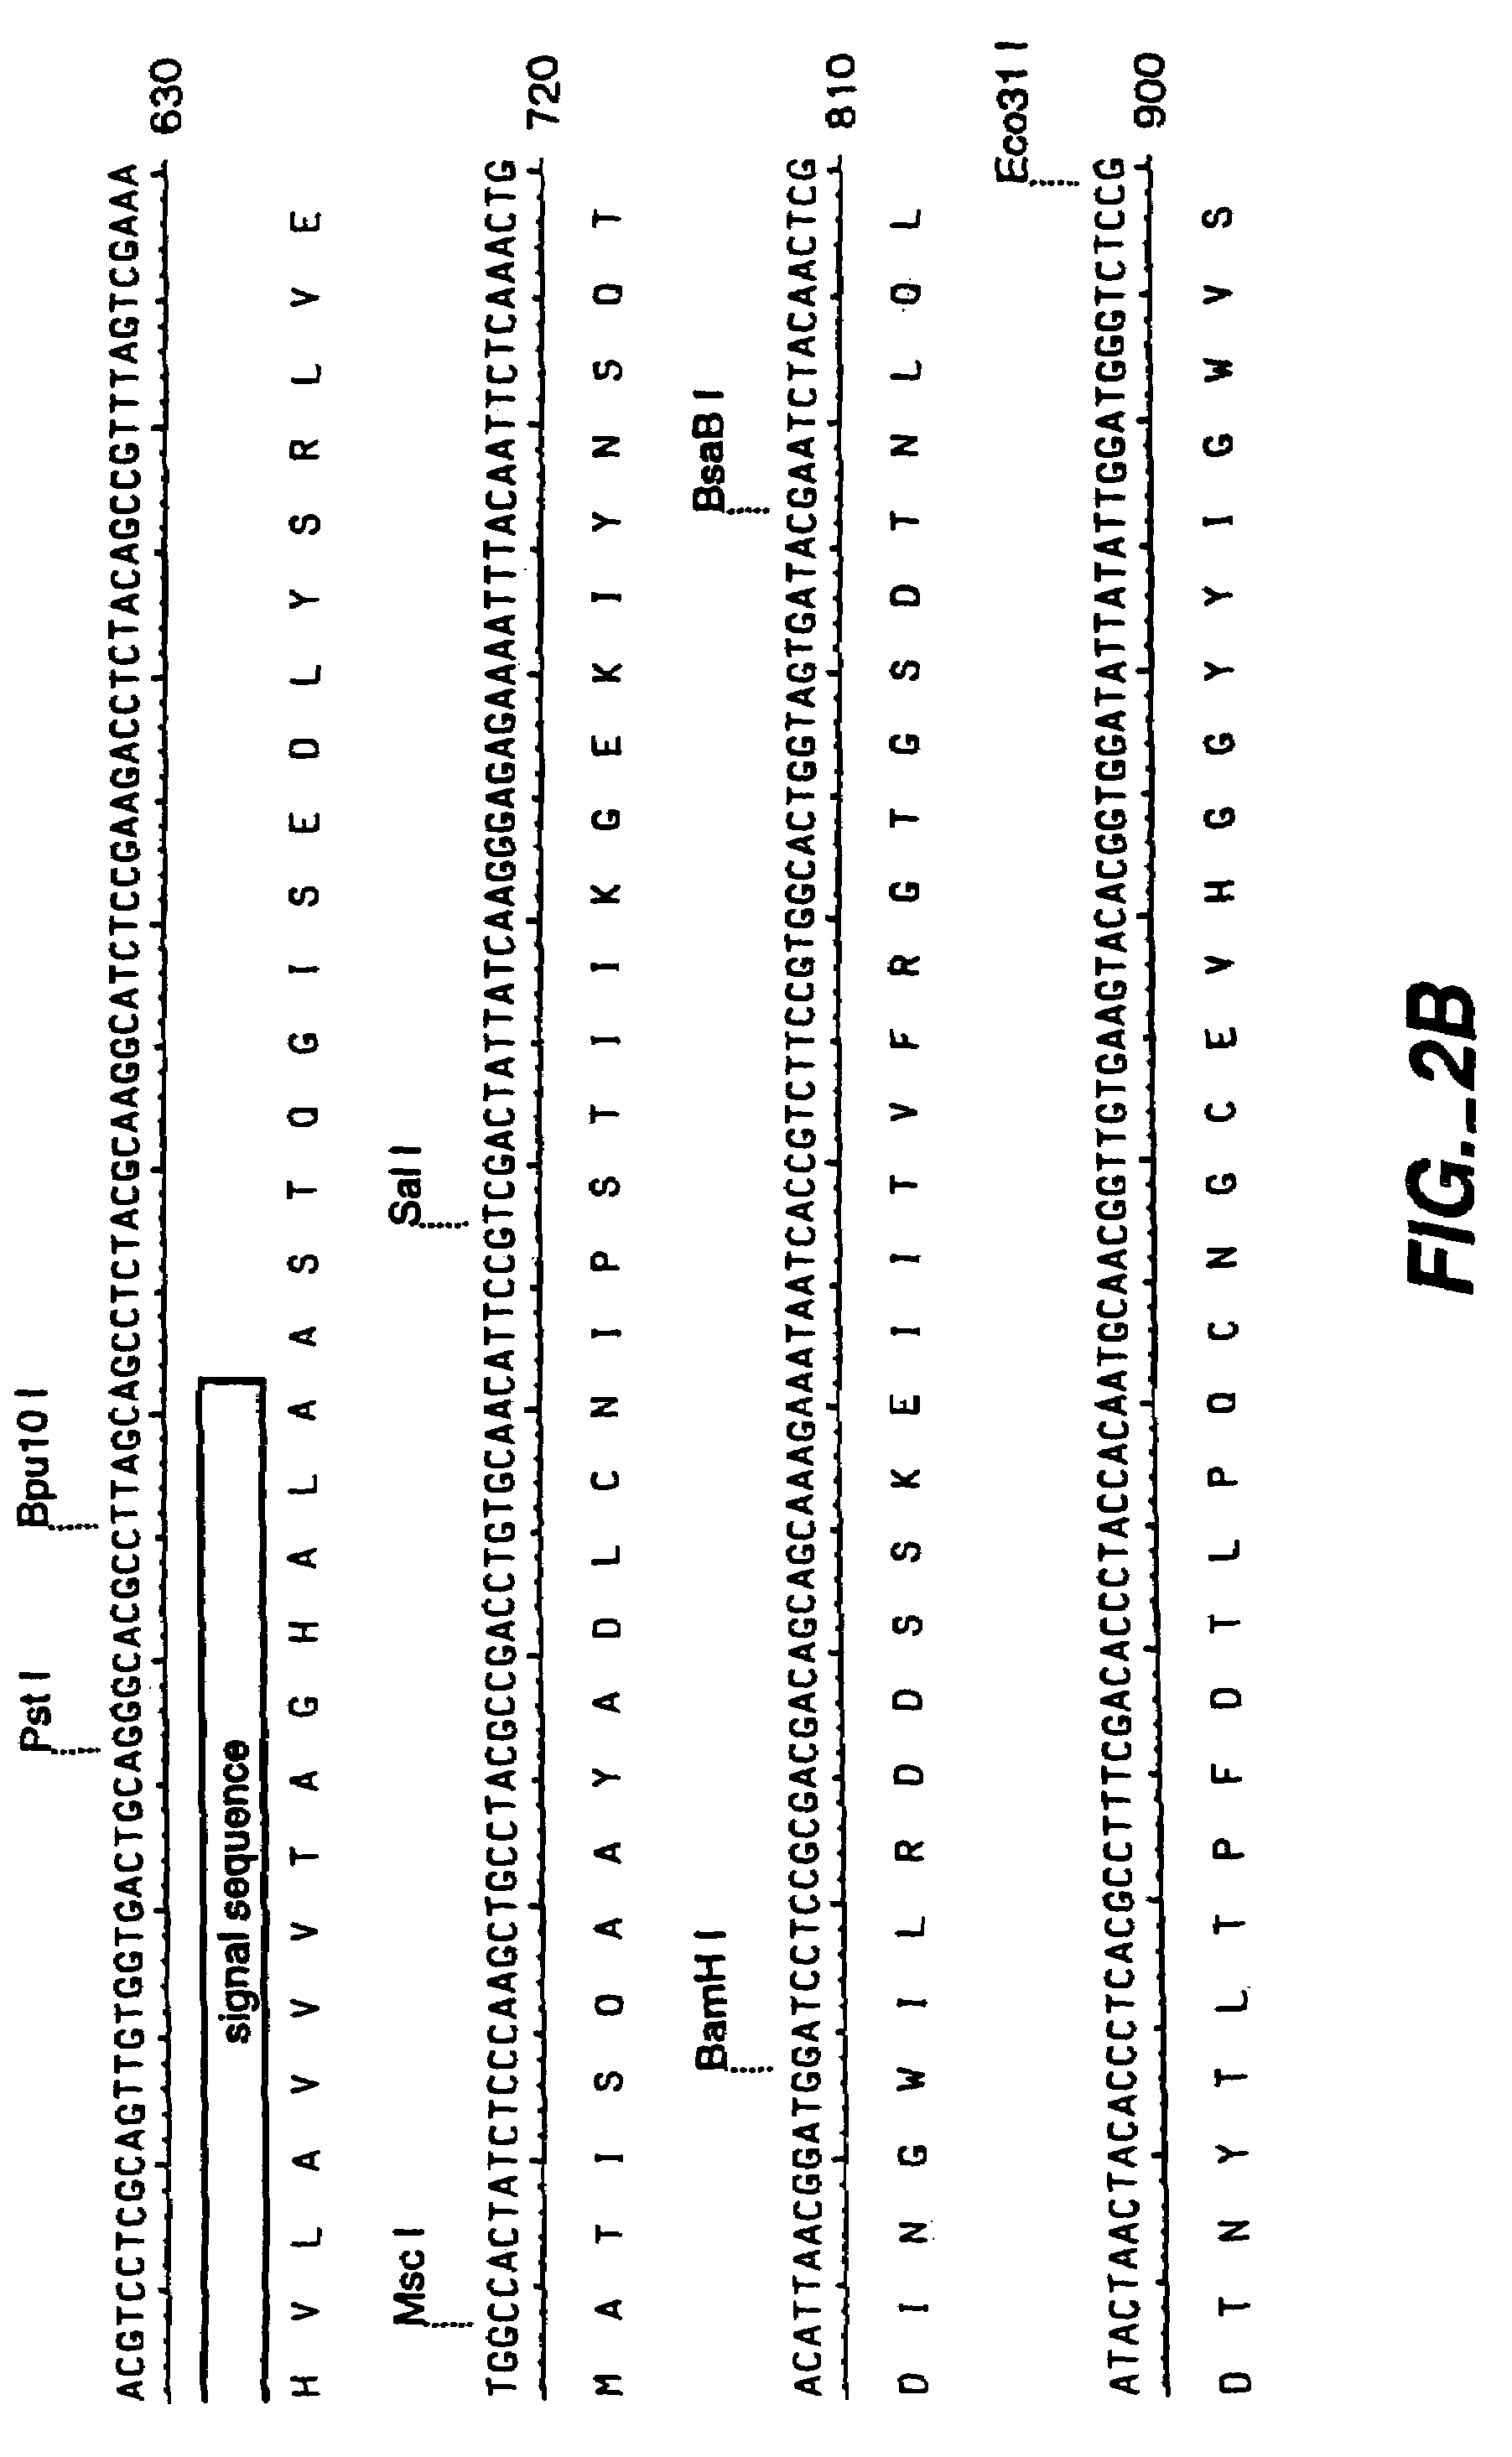 Manipulation of the phenolic acid content and digestibility of plant cell walls by targeted expression of genes encoding cell wall degrading enzymes